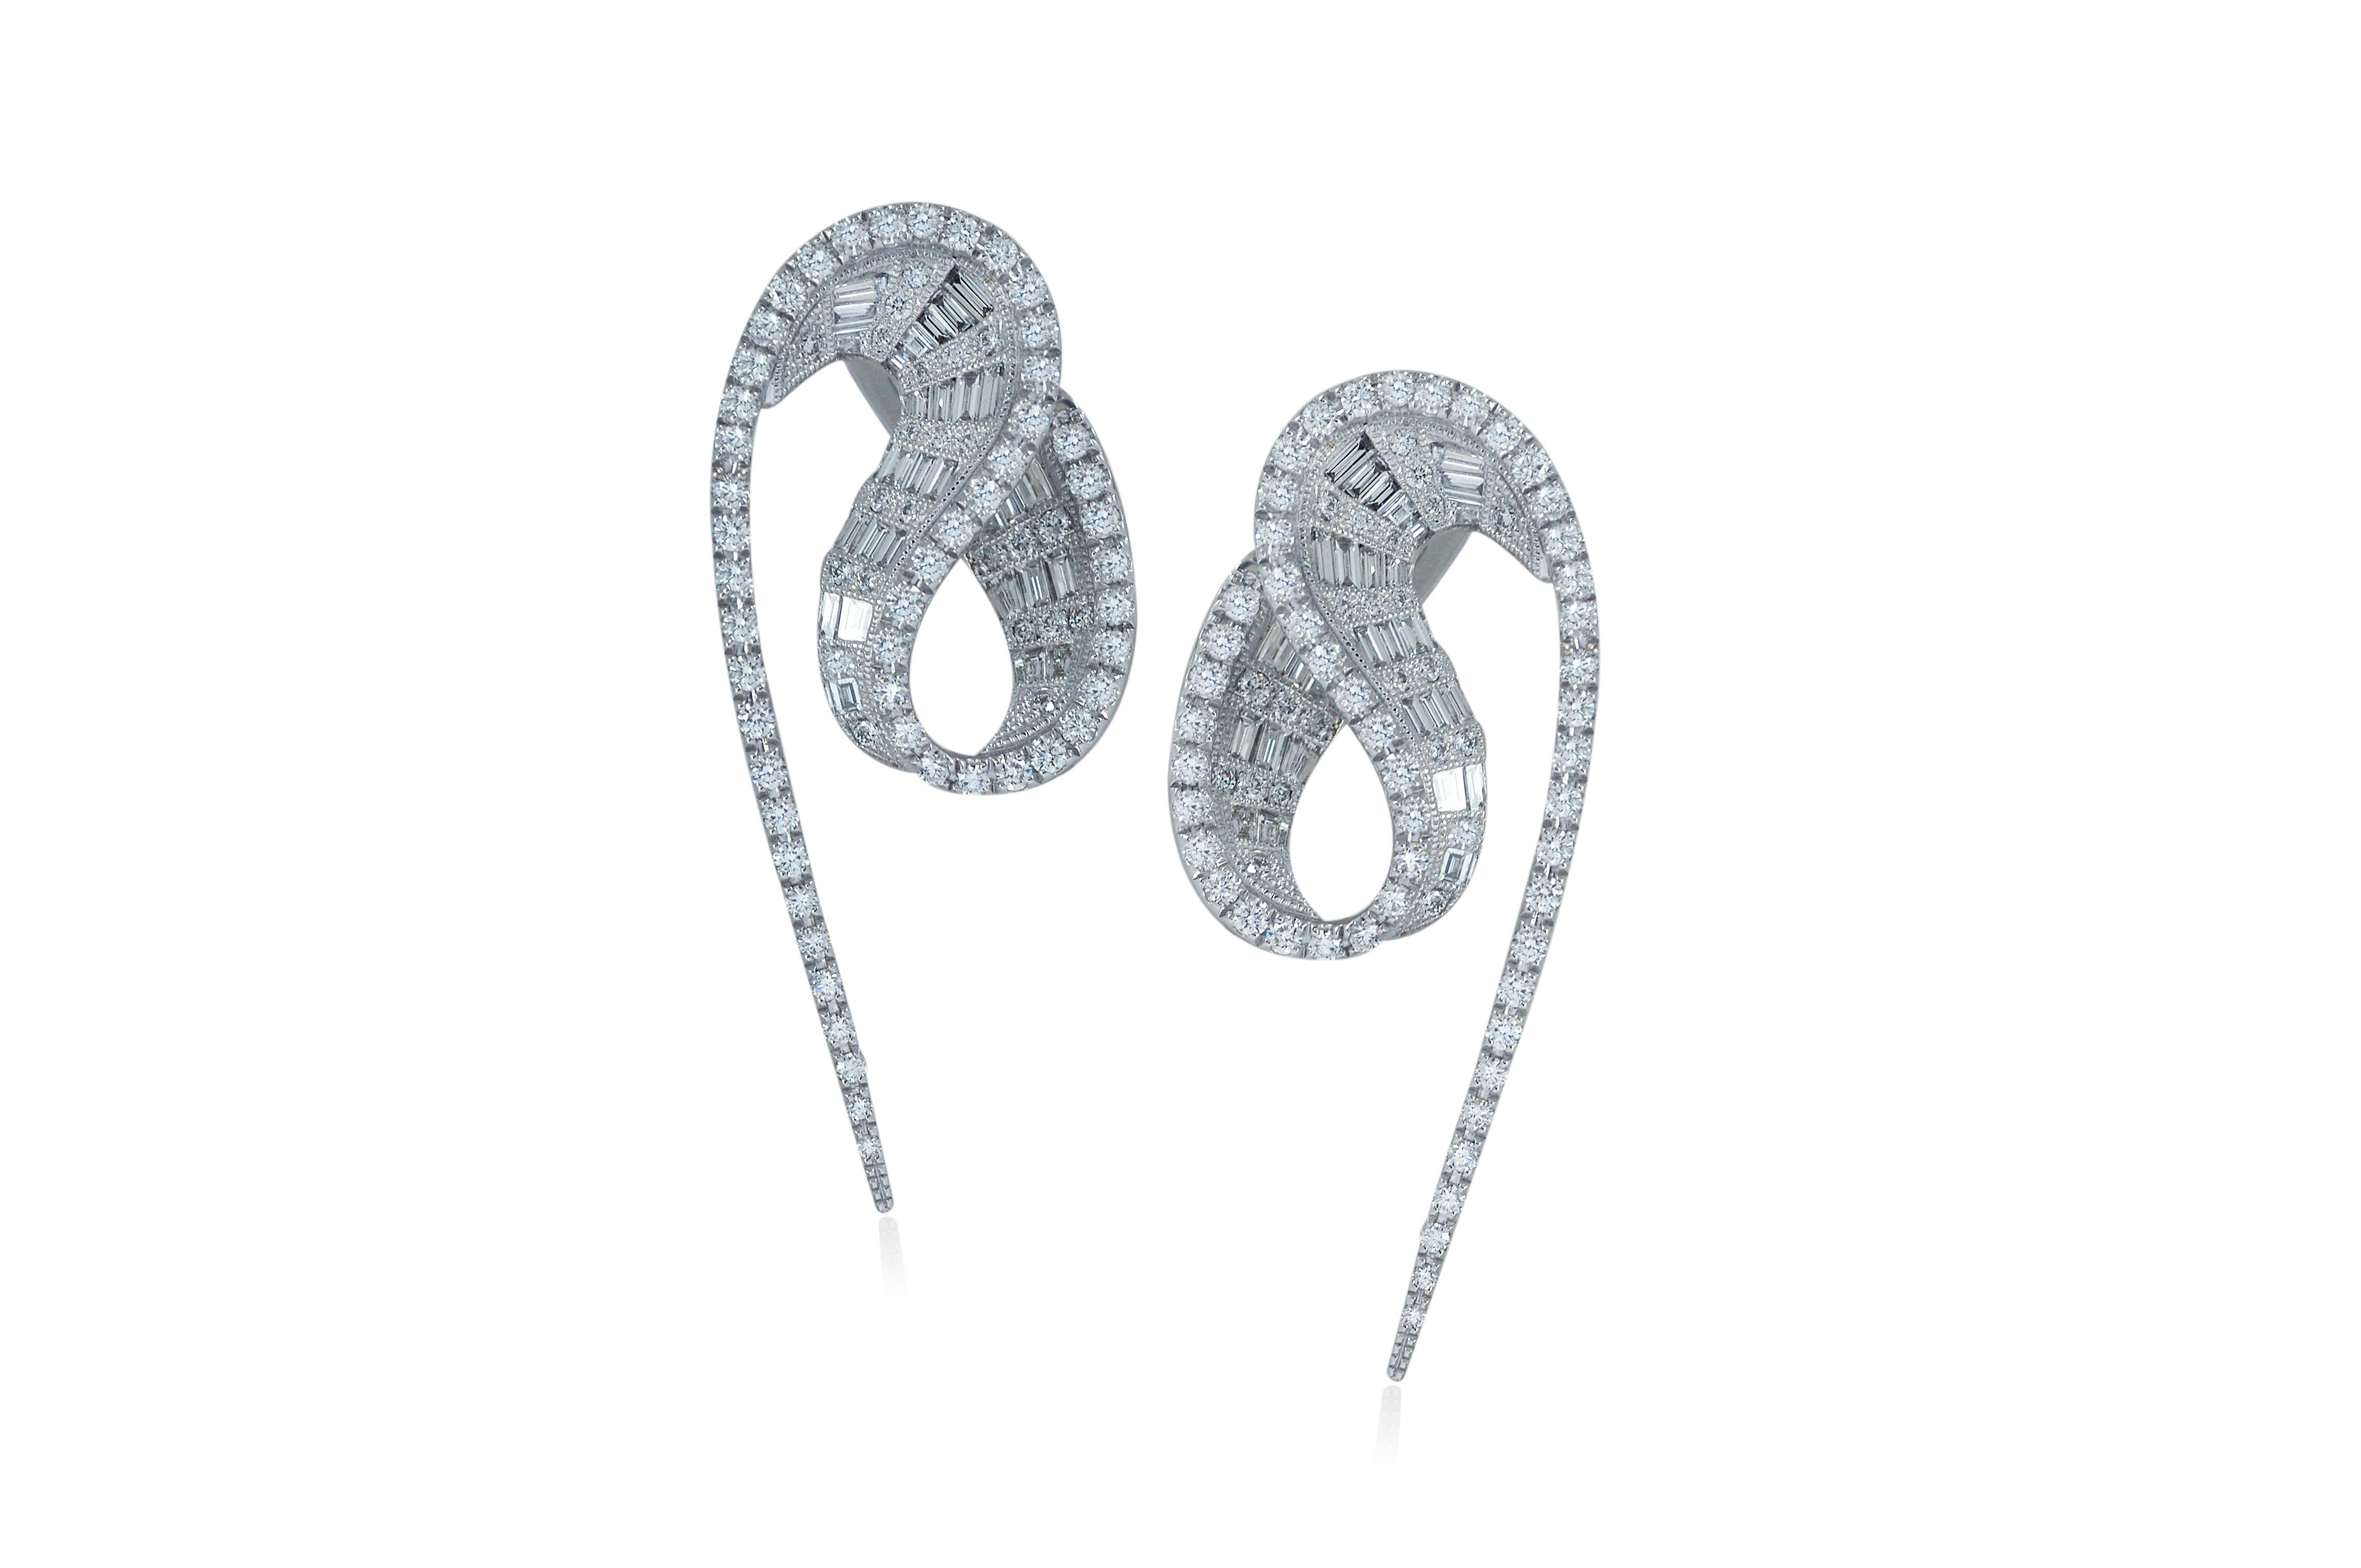 Diamond 2.06 carats Earrings 18K Rose Gold

Width: 1.3 cm
Length: 1.6 cm
Weight: 3.07 grams

Talay explores the sea’s ephemeral character and rightfully captures the essence of the sea. From the colorful ocean floor to the crashing waves, the